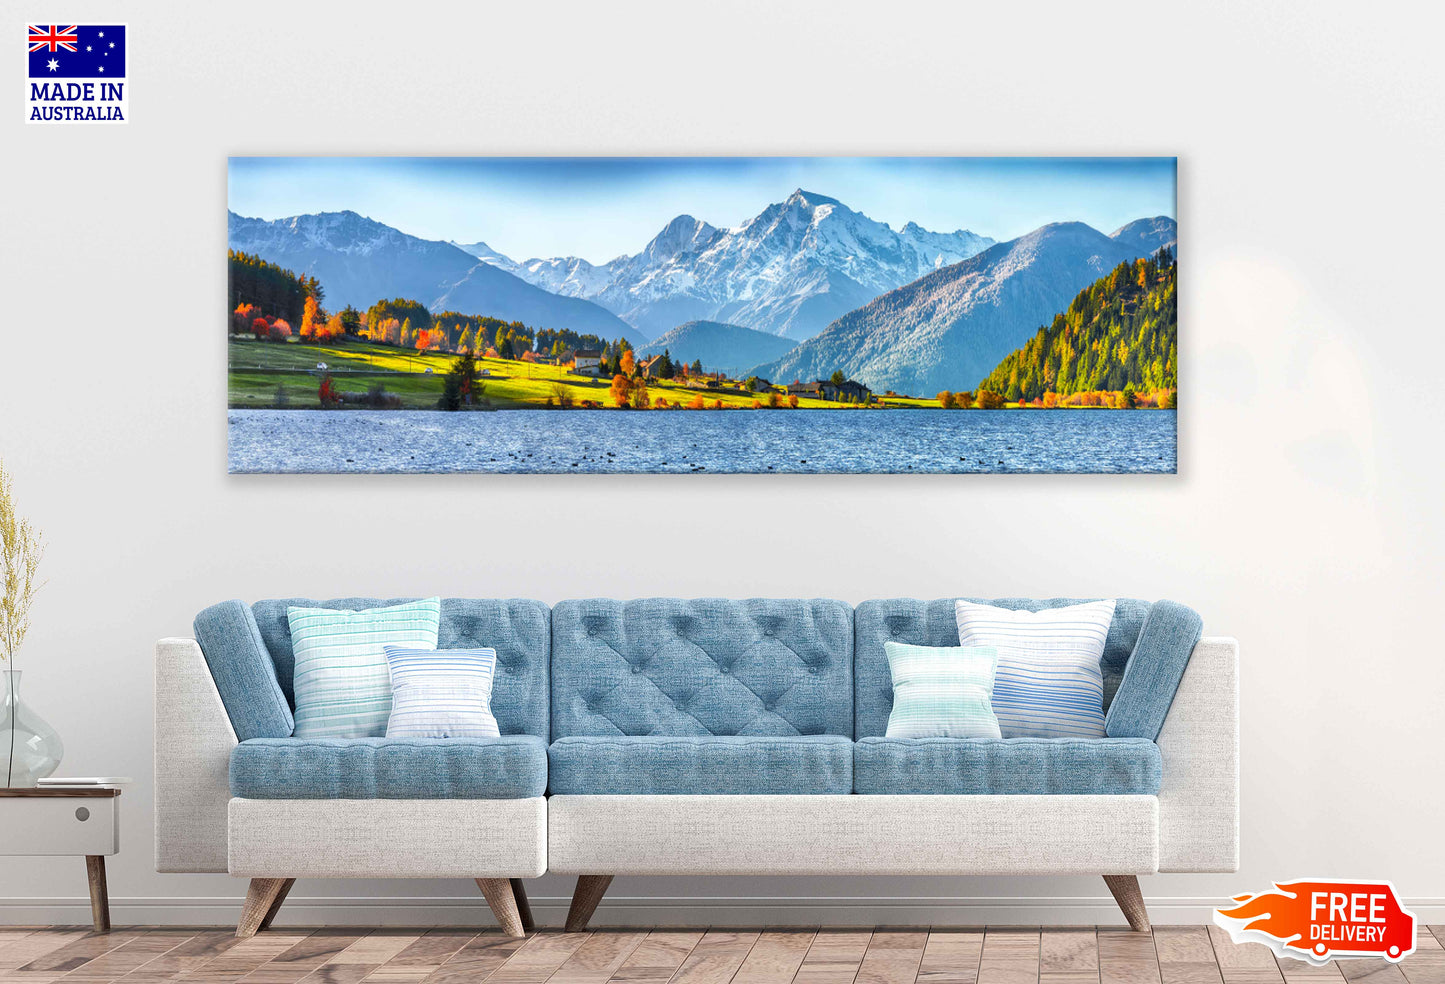 Panoramic Canvas Lake Mountain Field View Photograph High Quality 100% Australian Made Wall Canvas Print Ready to Hang